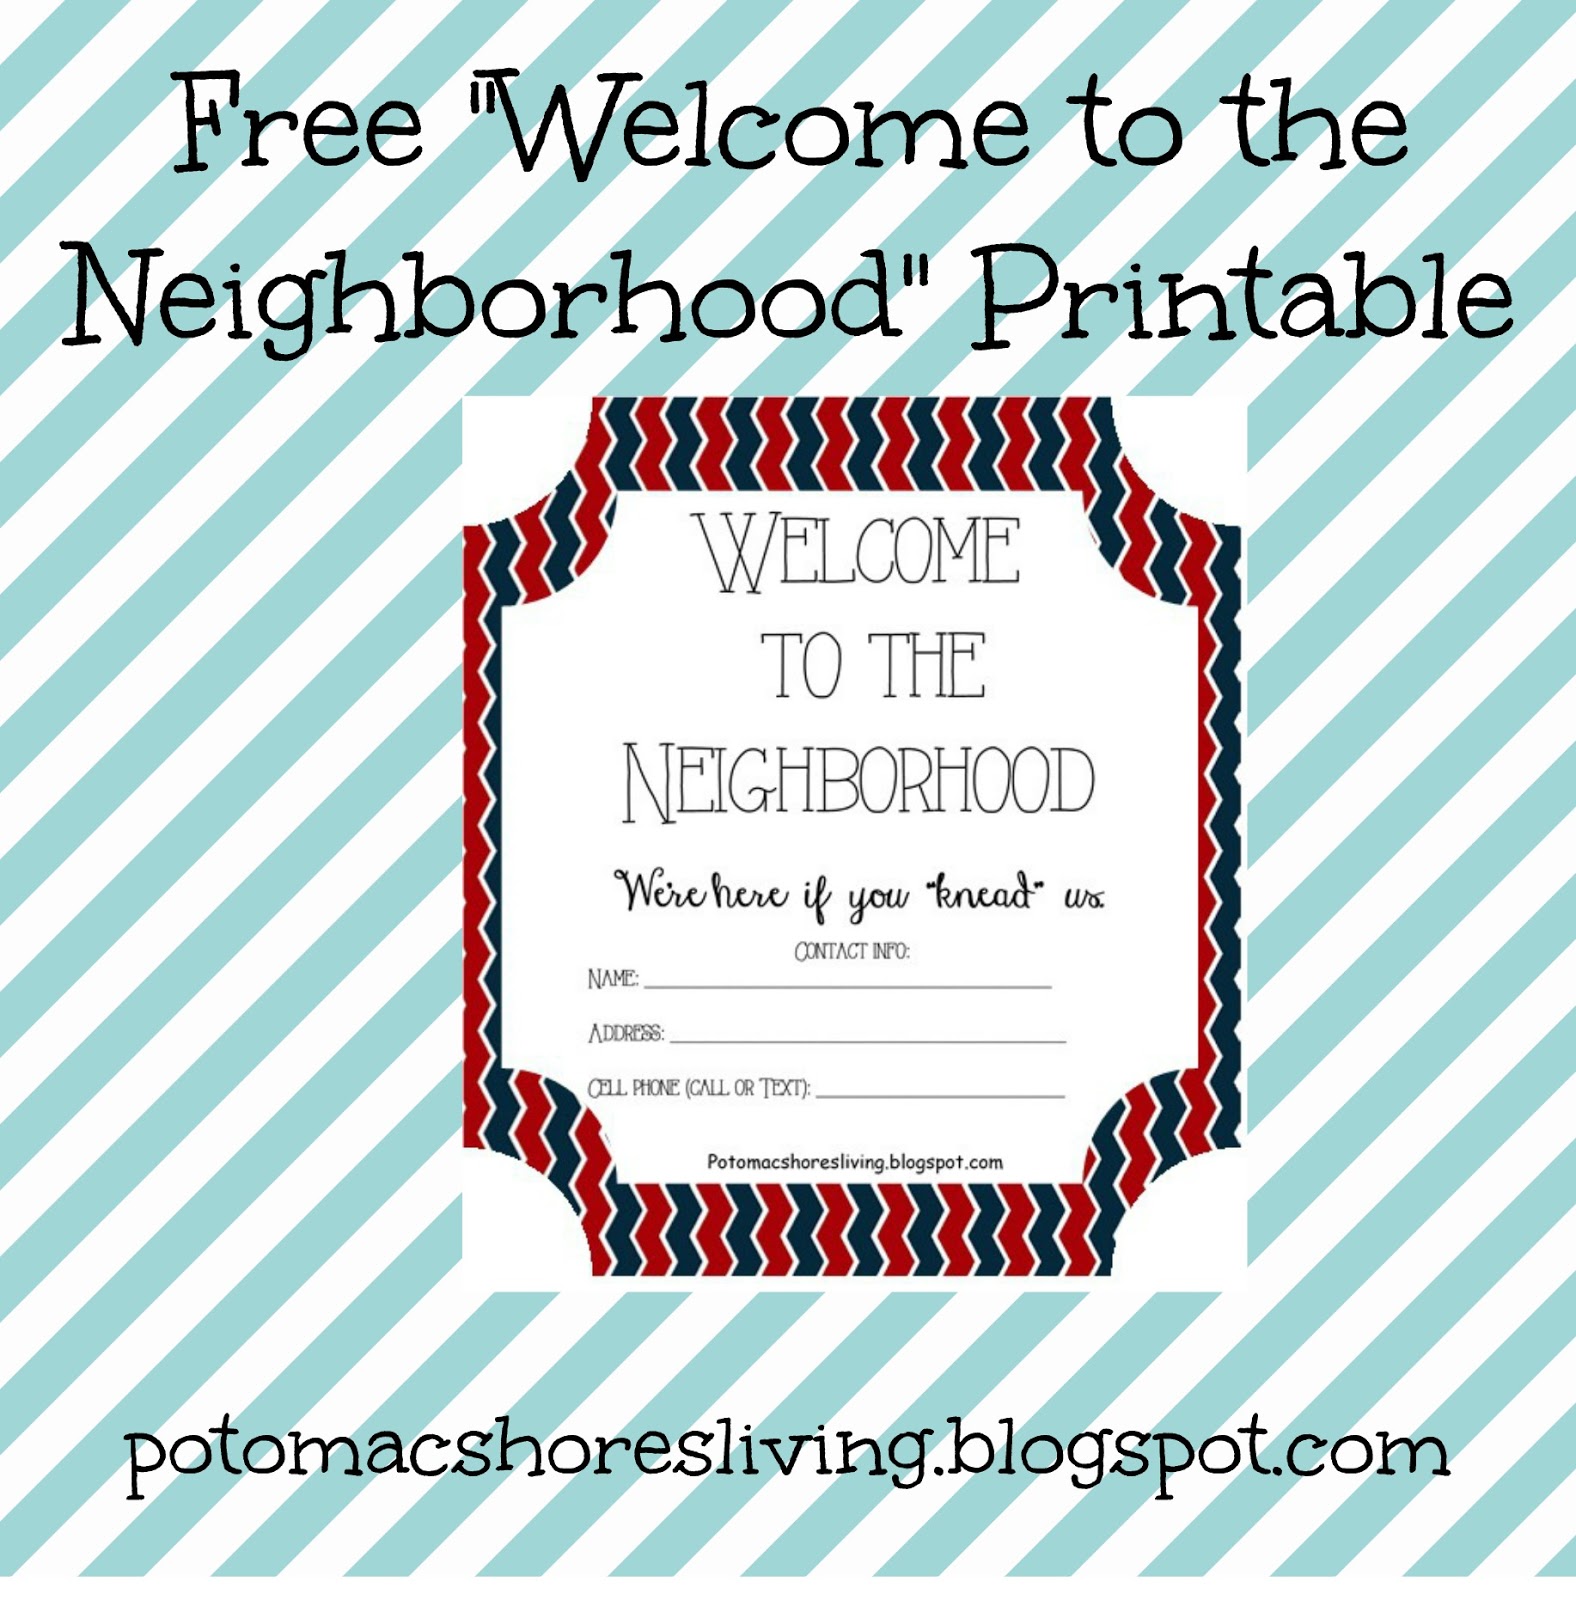 to the neighborhood printable That are Breathtaking Derrick